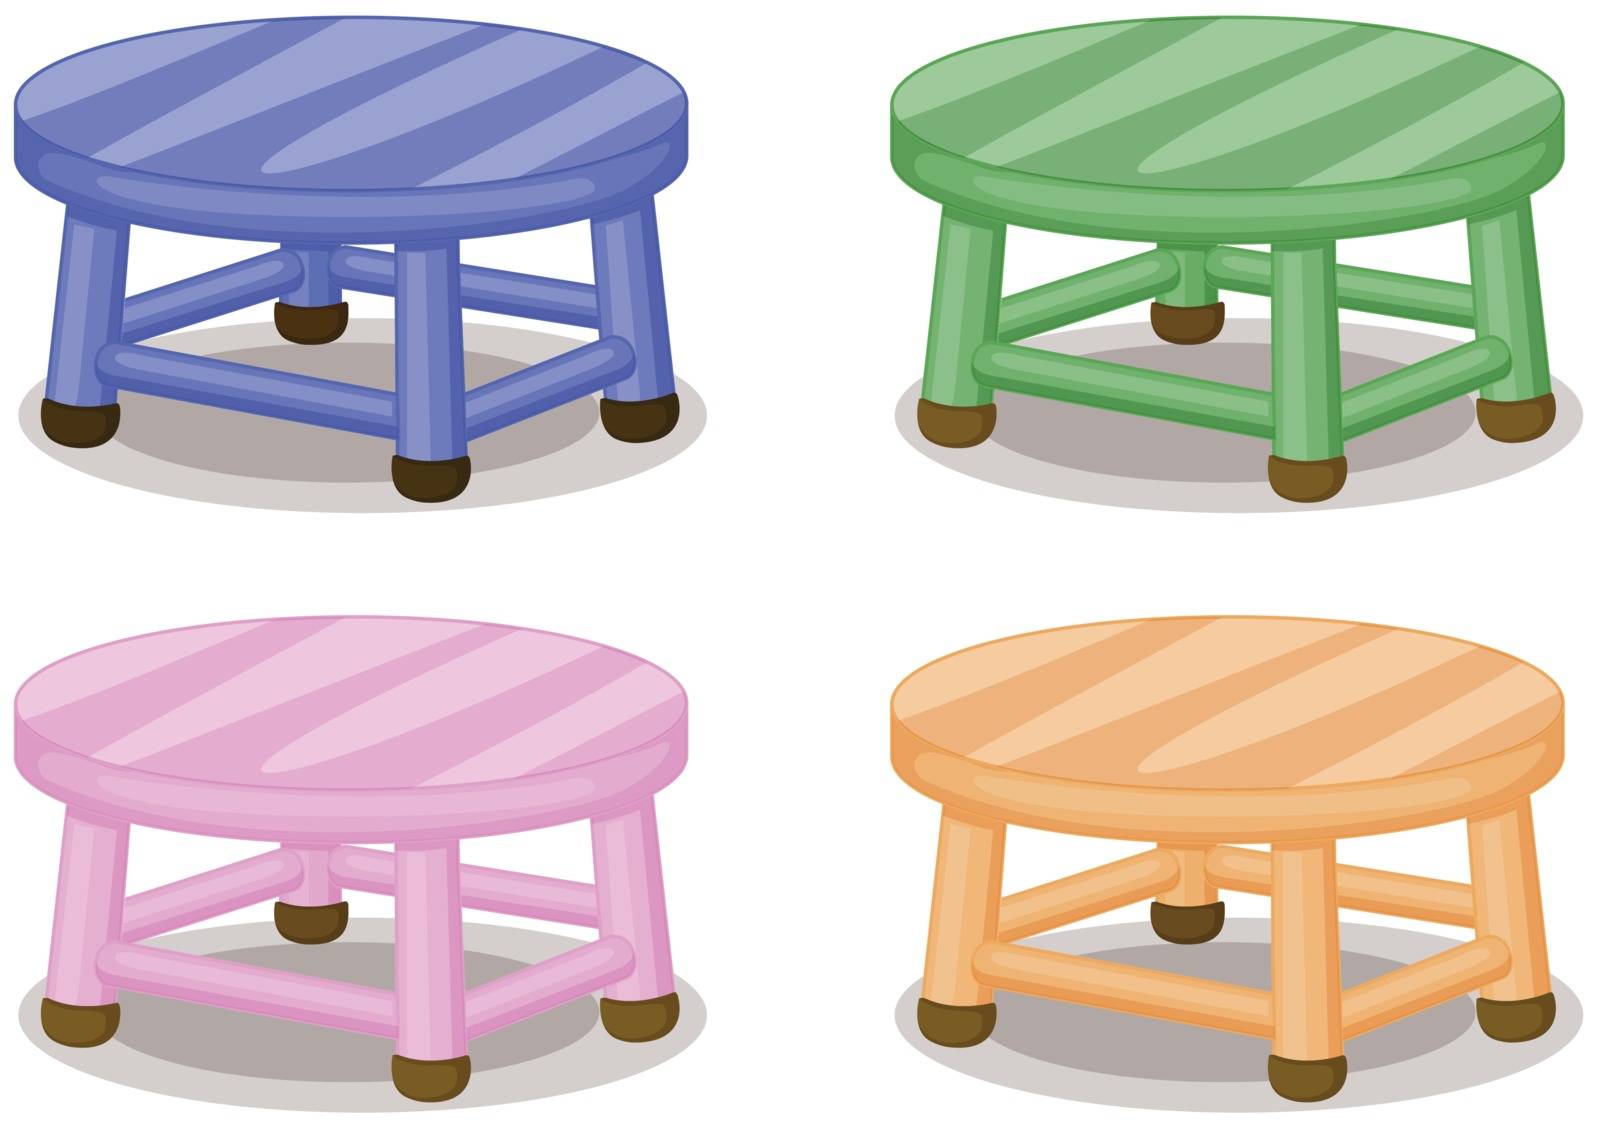 Four stools by iimages